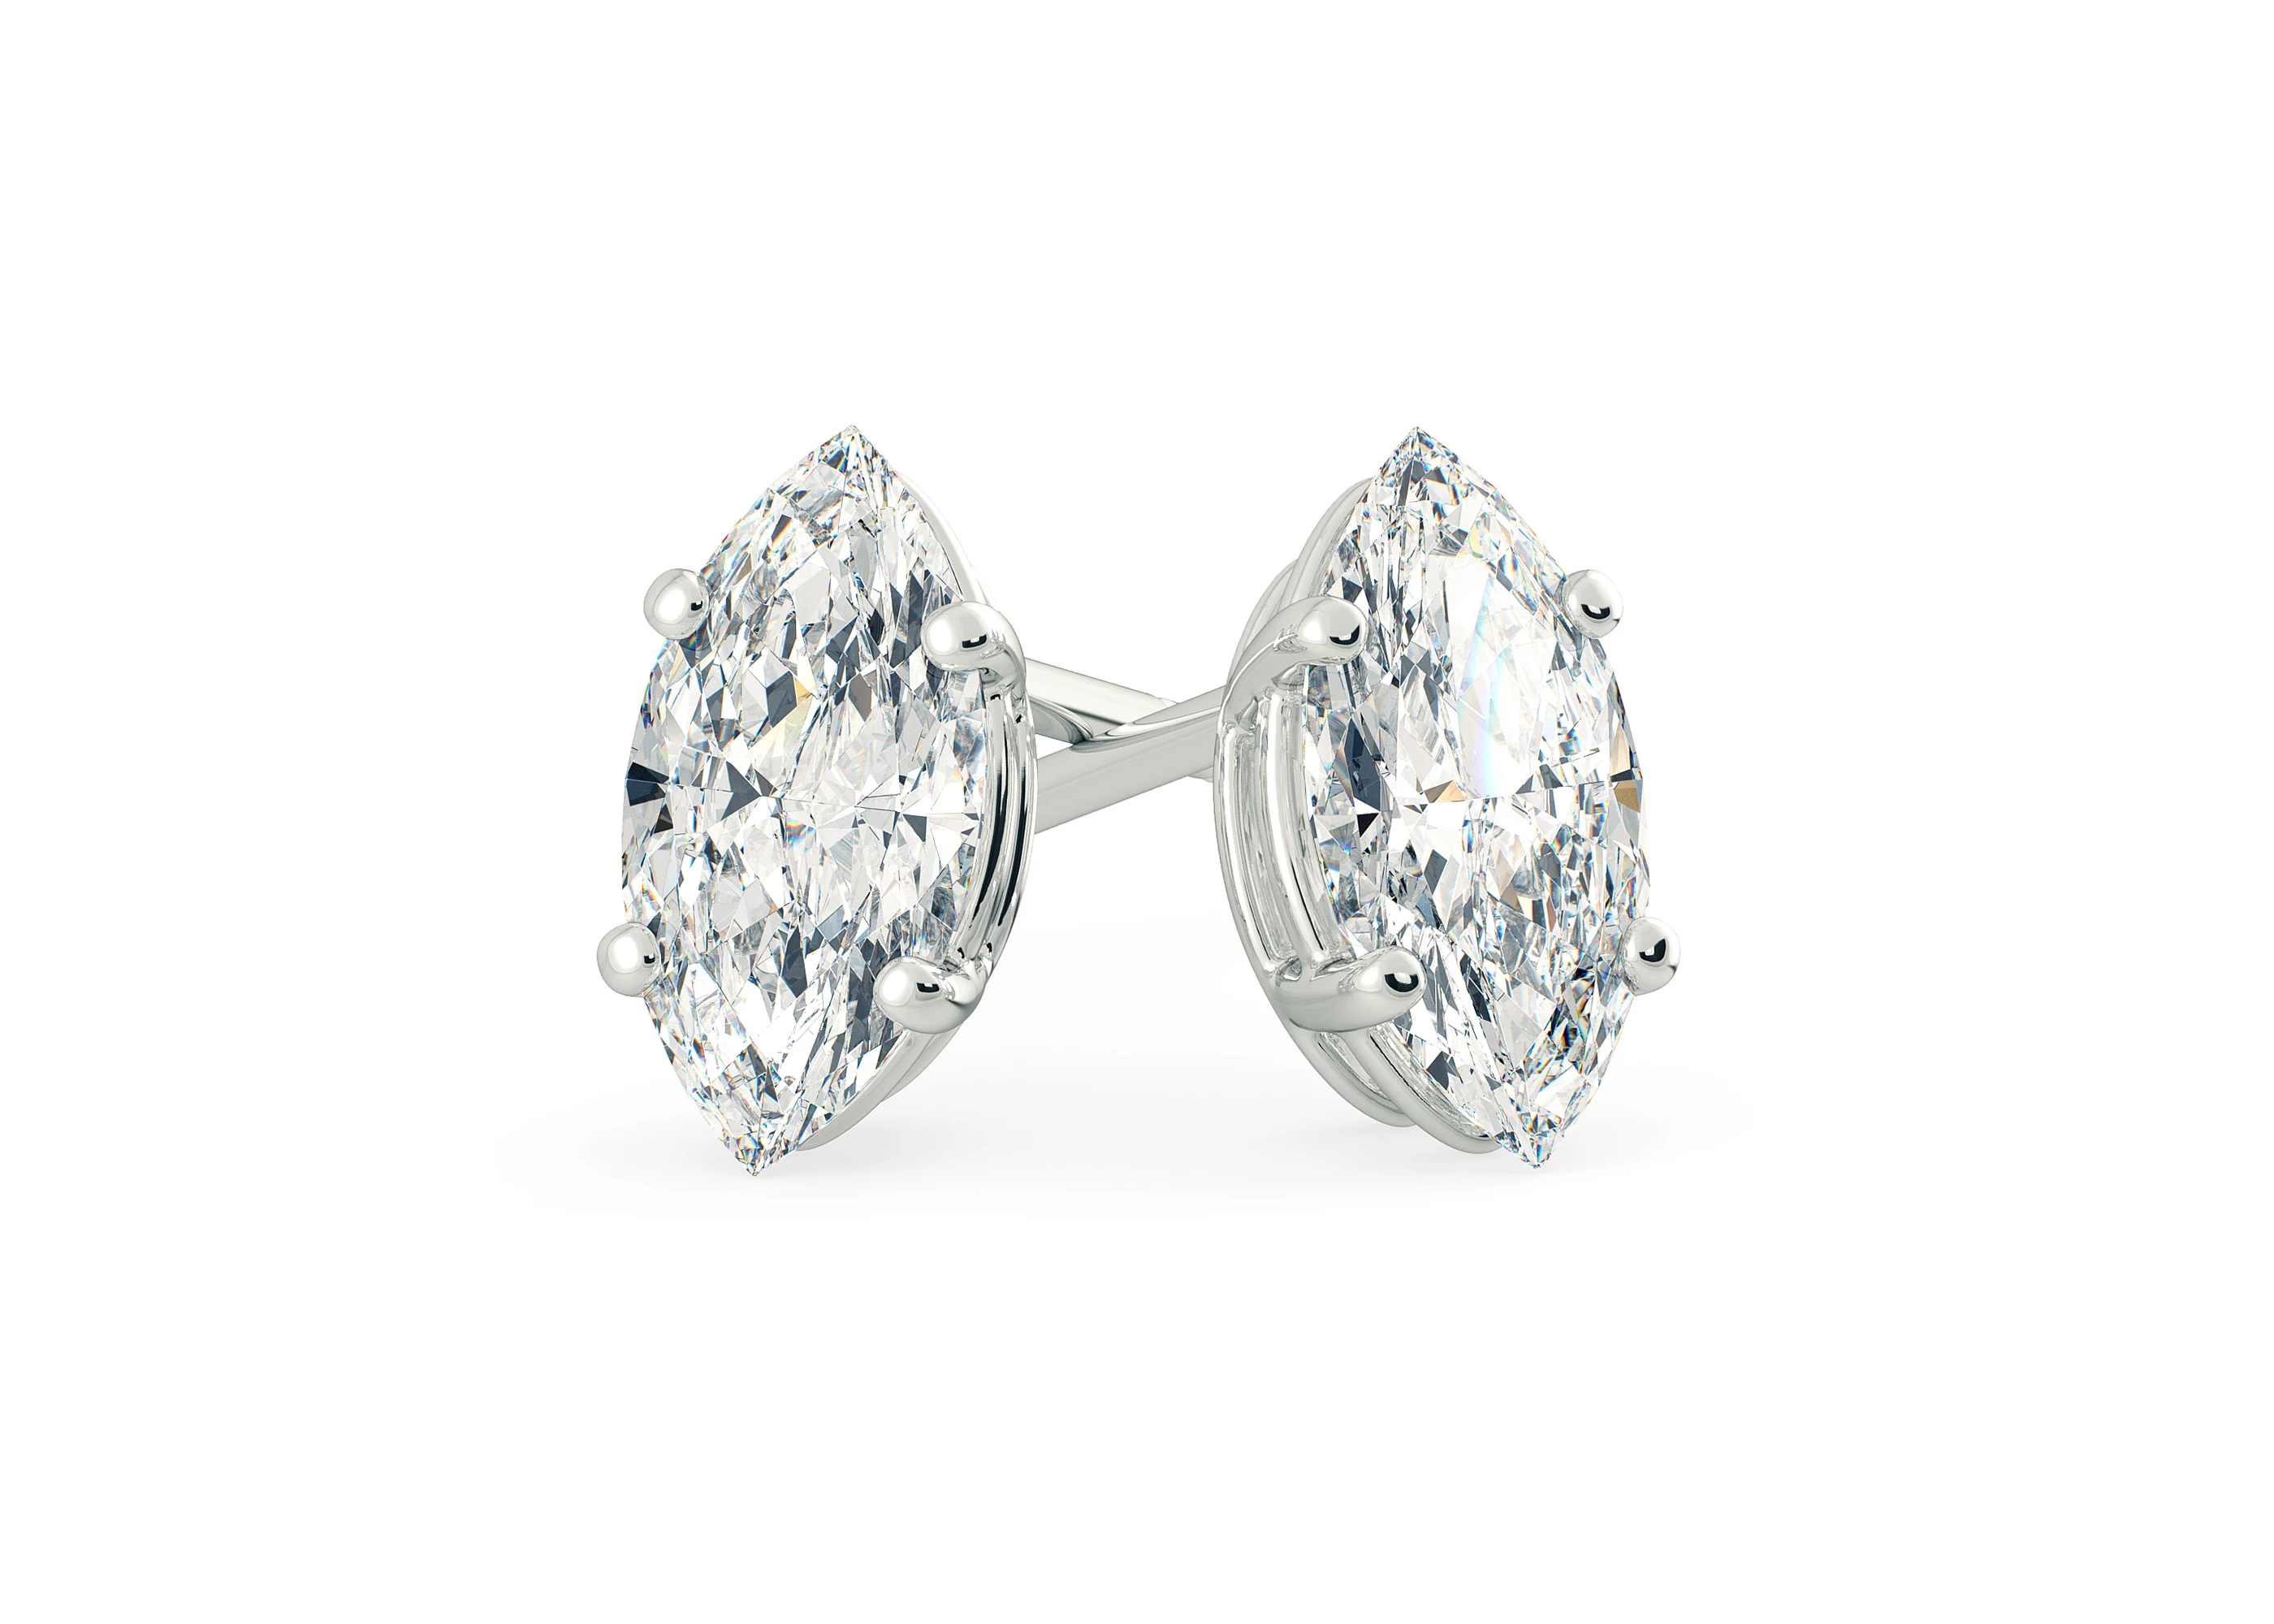 Two Carat Marquise Diamond Stud Earrings in 9K White Gold